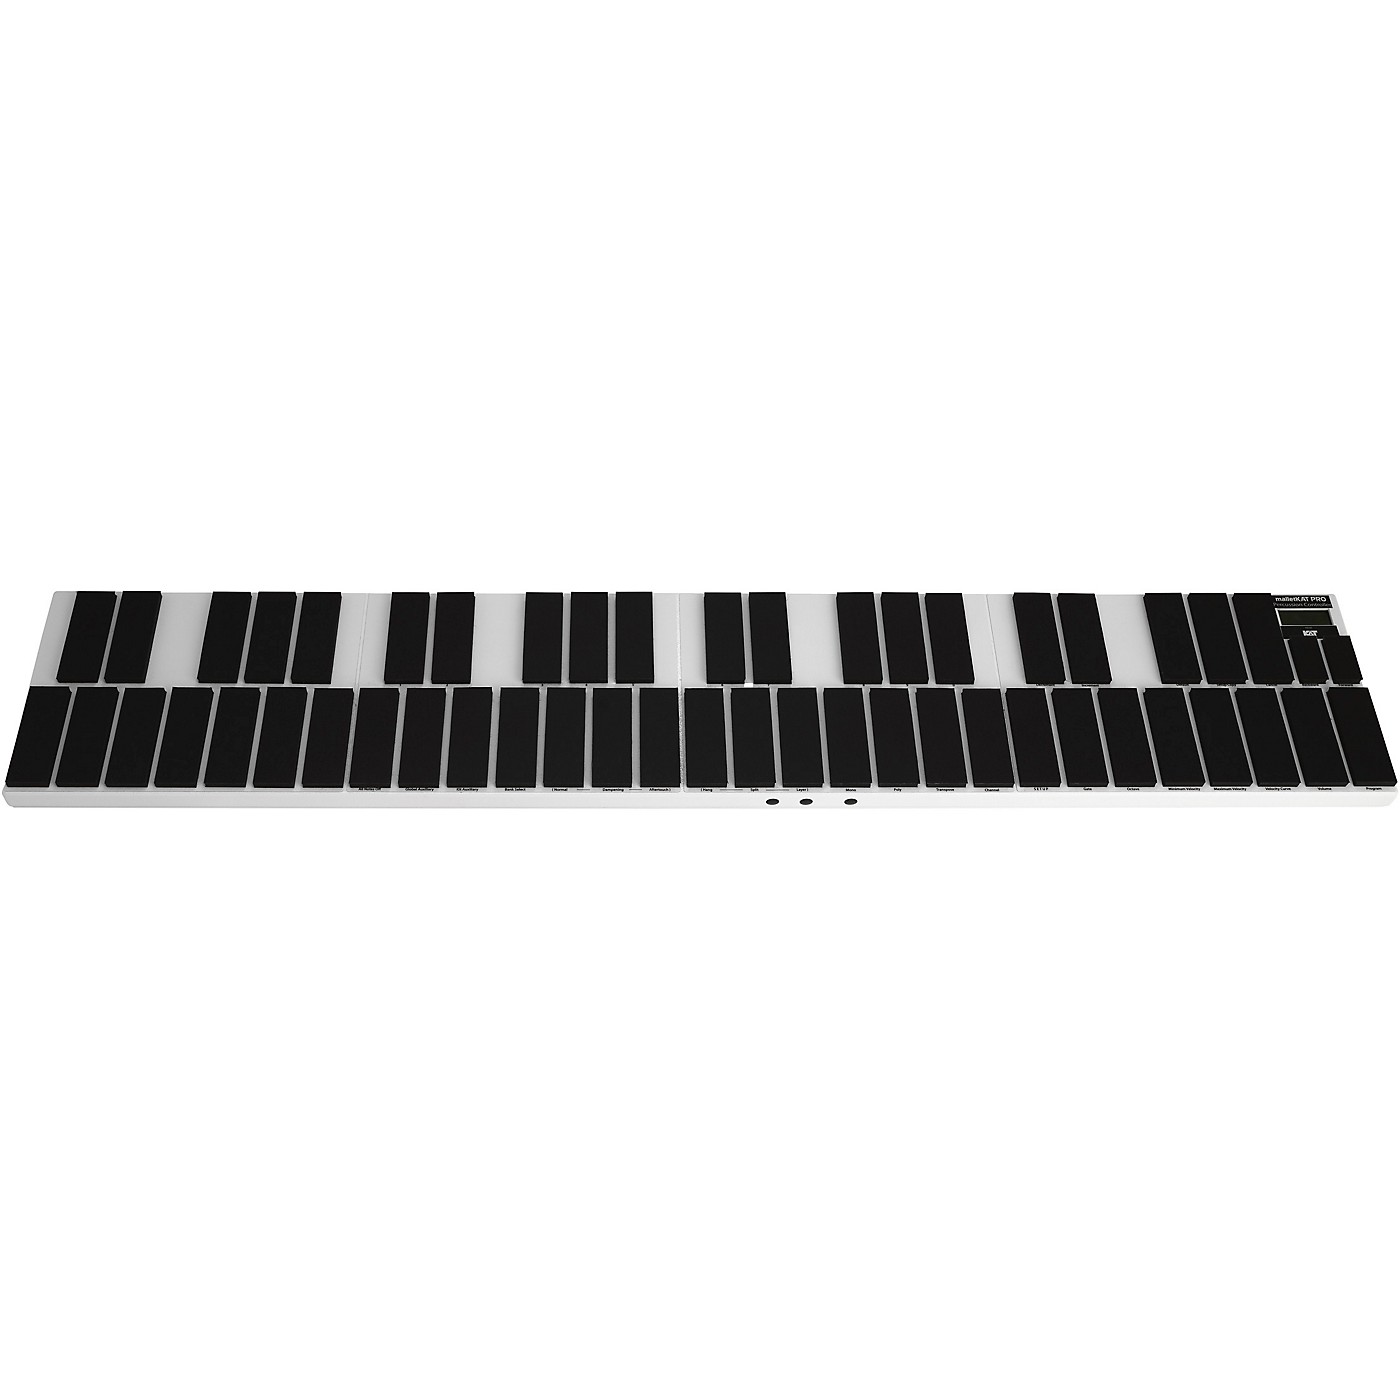 KAT Percussion MalletKAT 8.5 Grand (4-Octave Keyboard Percussion Controller with GigKAT 2 Module) thumbnail